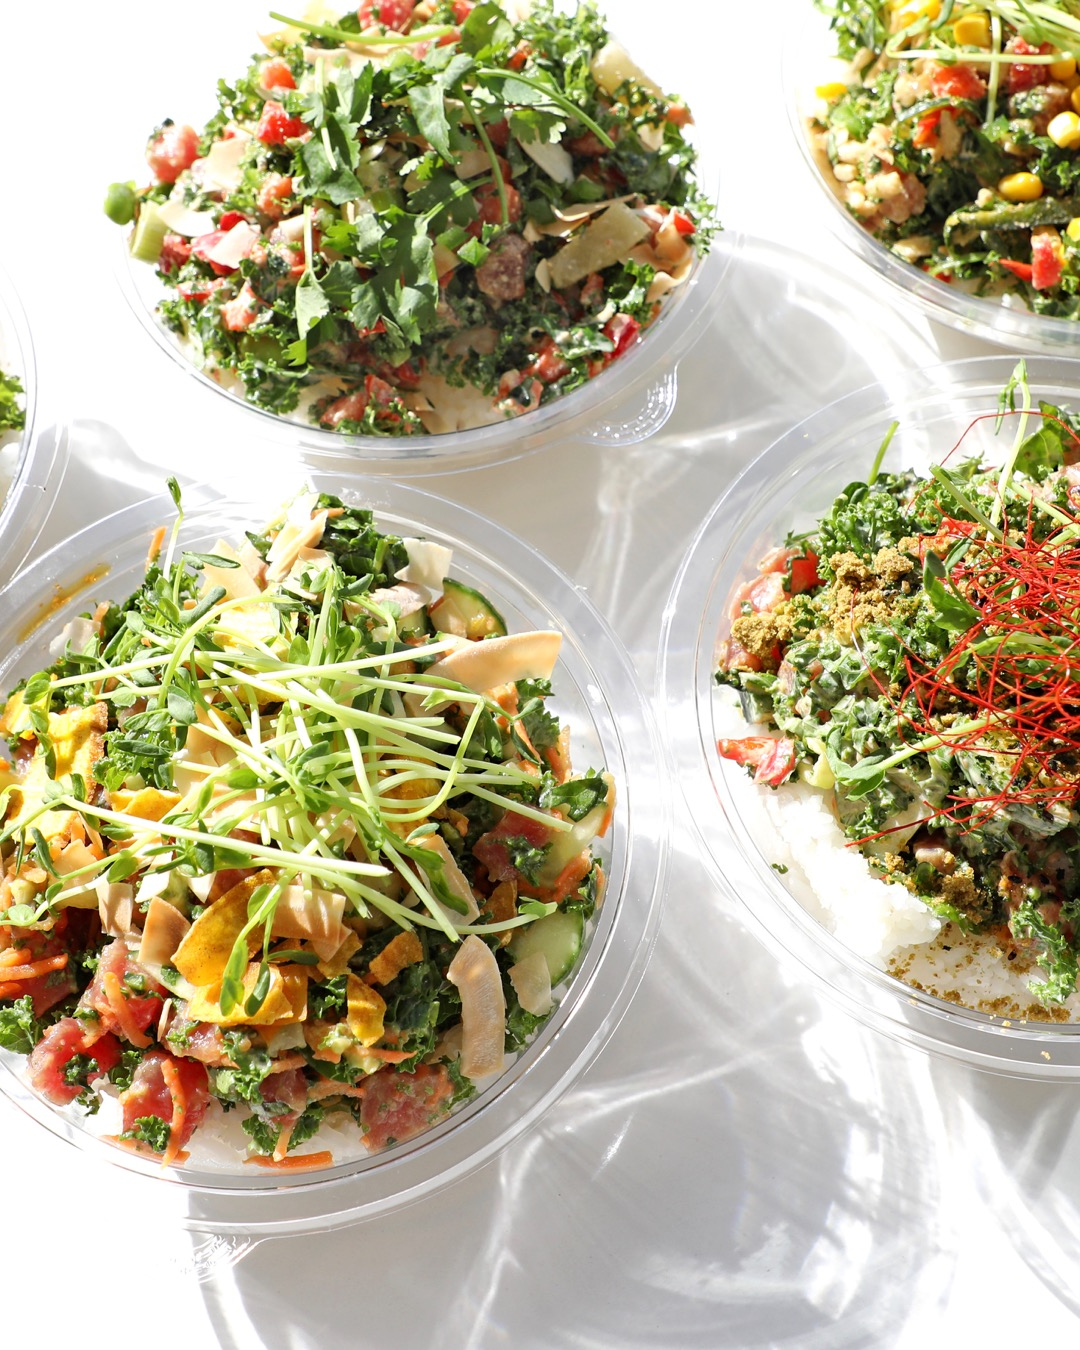 A group of plastic bowls of salad.